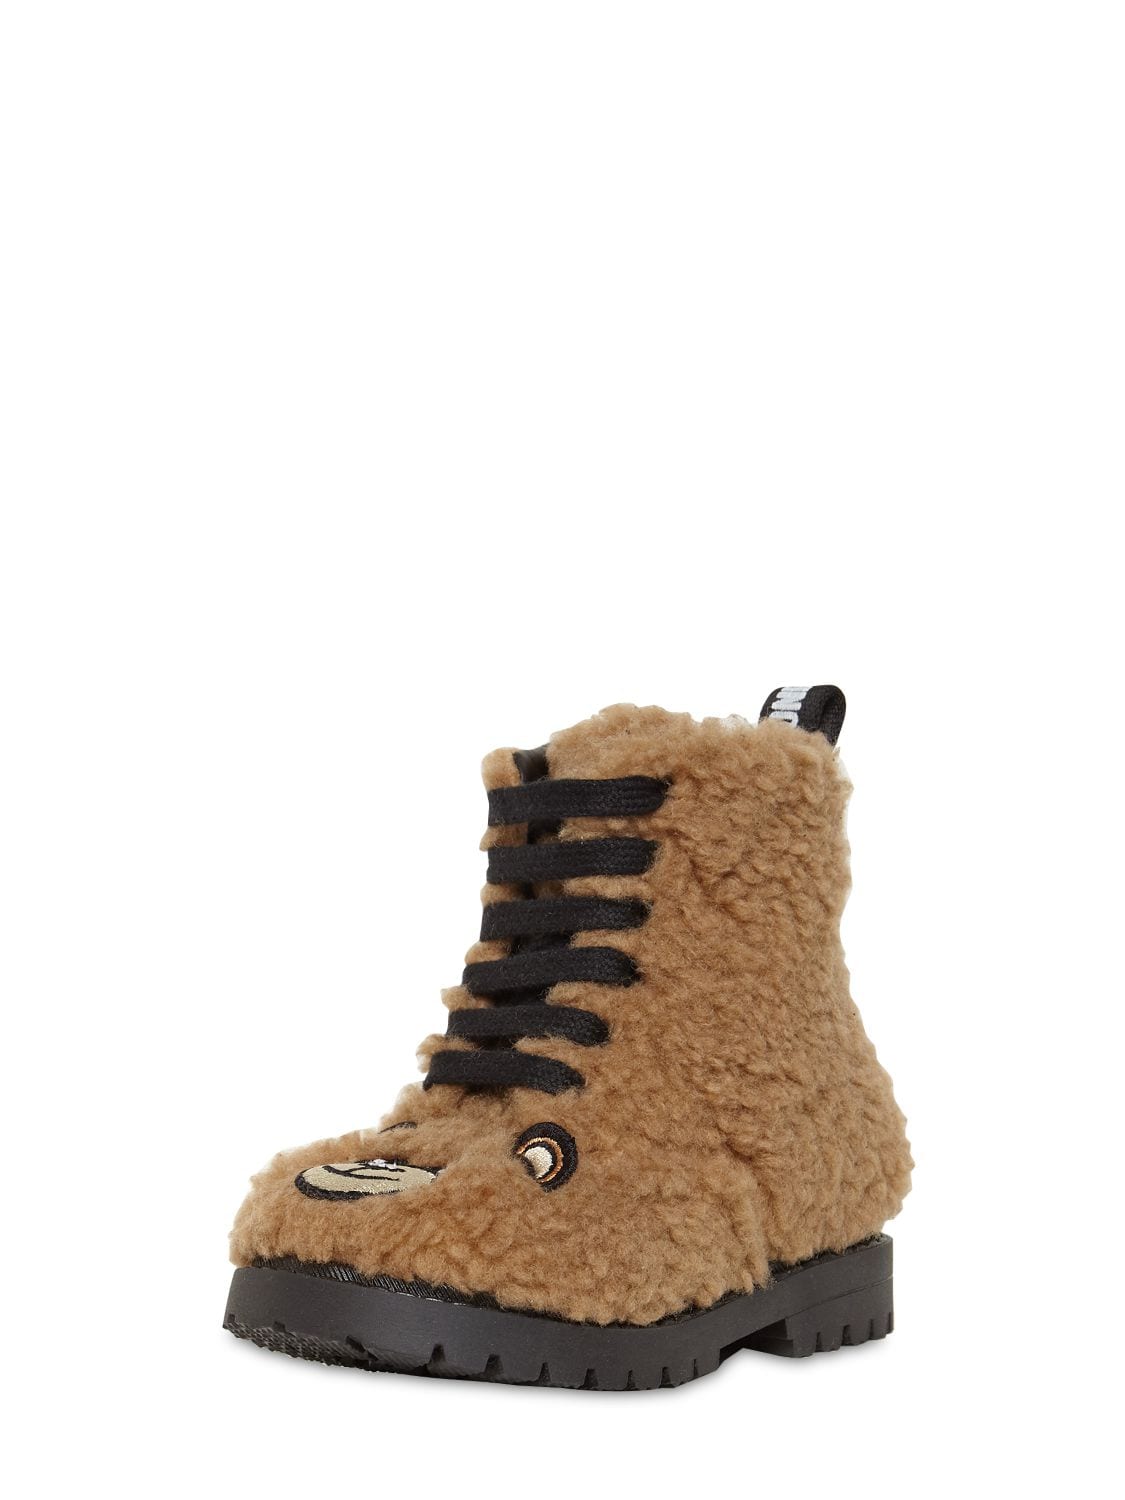 MOSCHINO EMBROIDERED BEAR PATCH TEDDY BOOTS,74I1W4005-VKFSIDE1